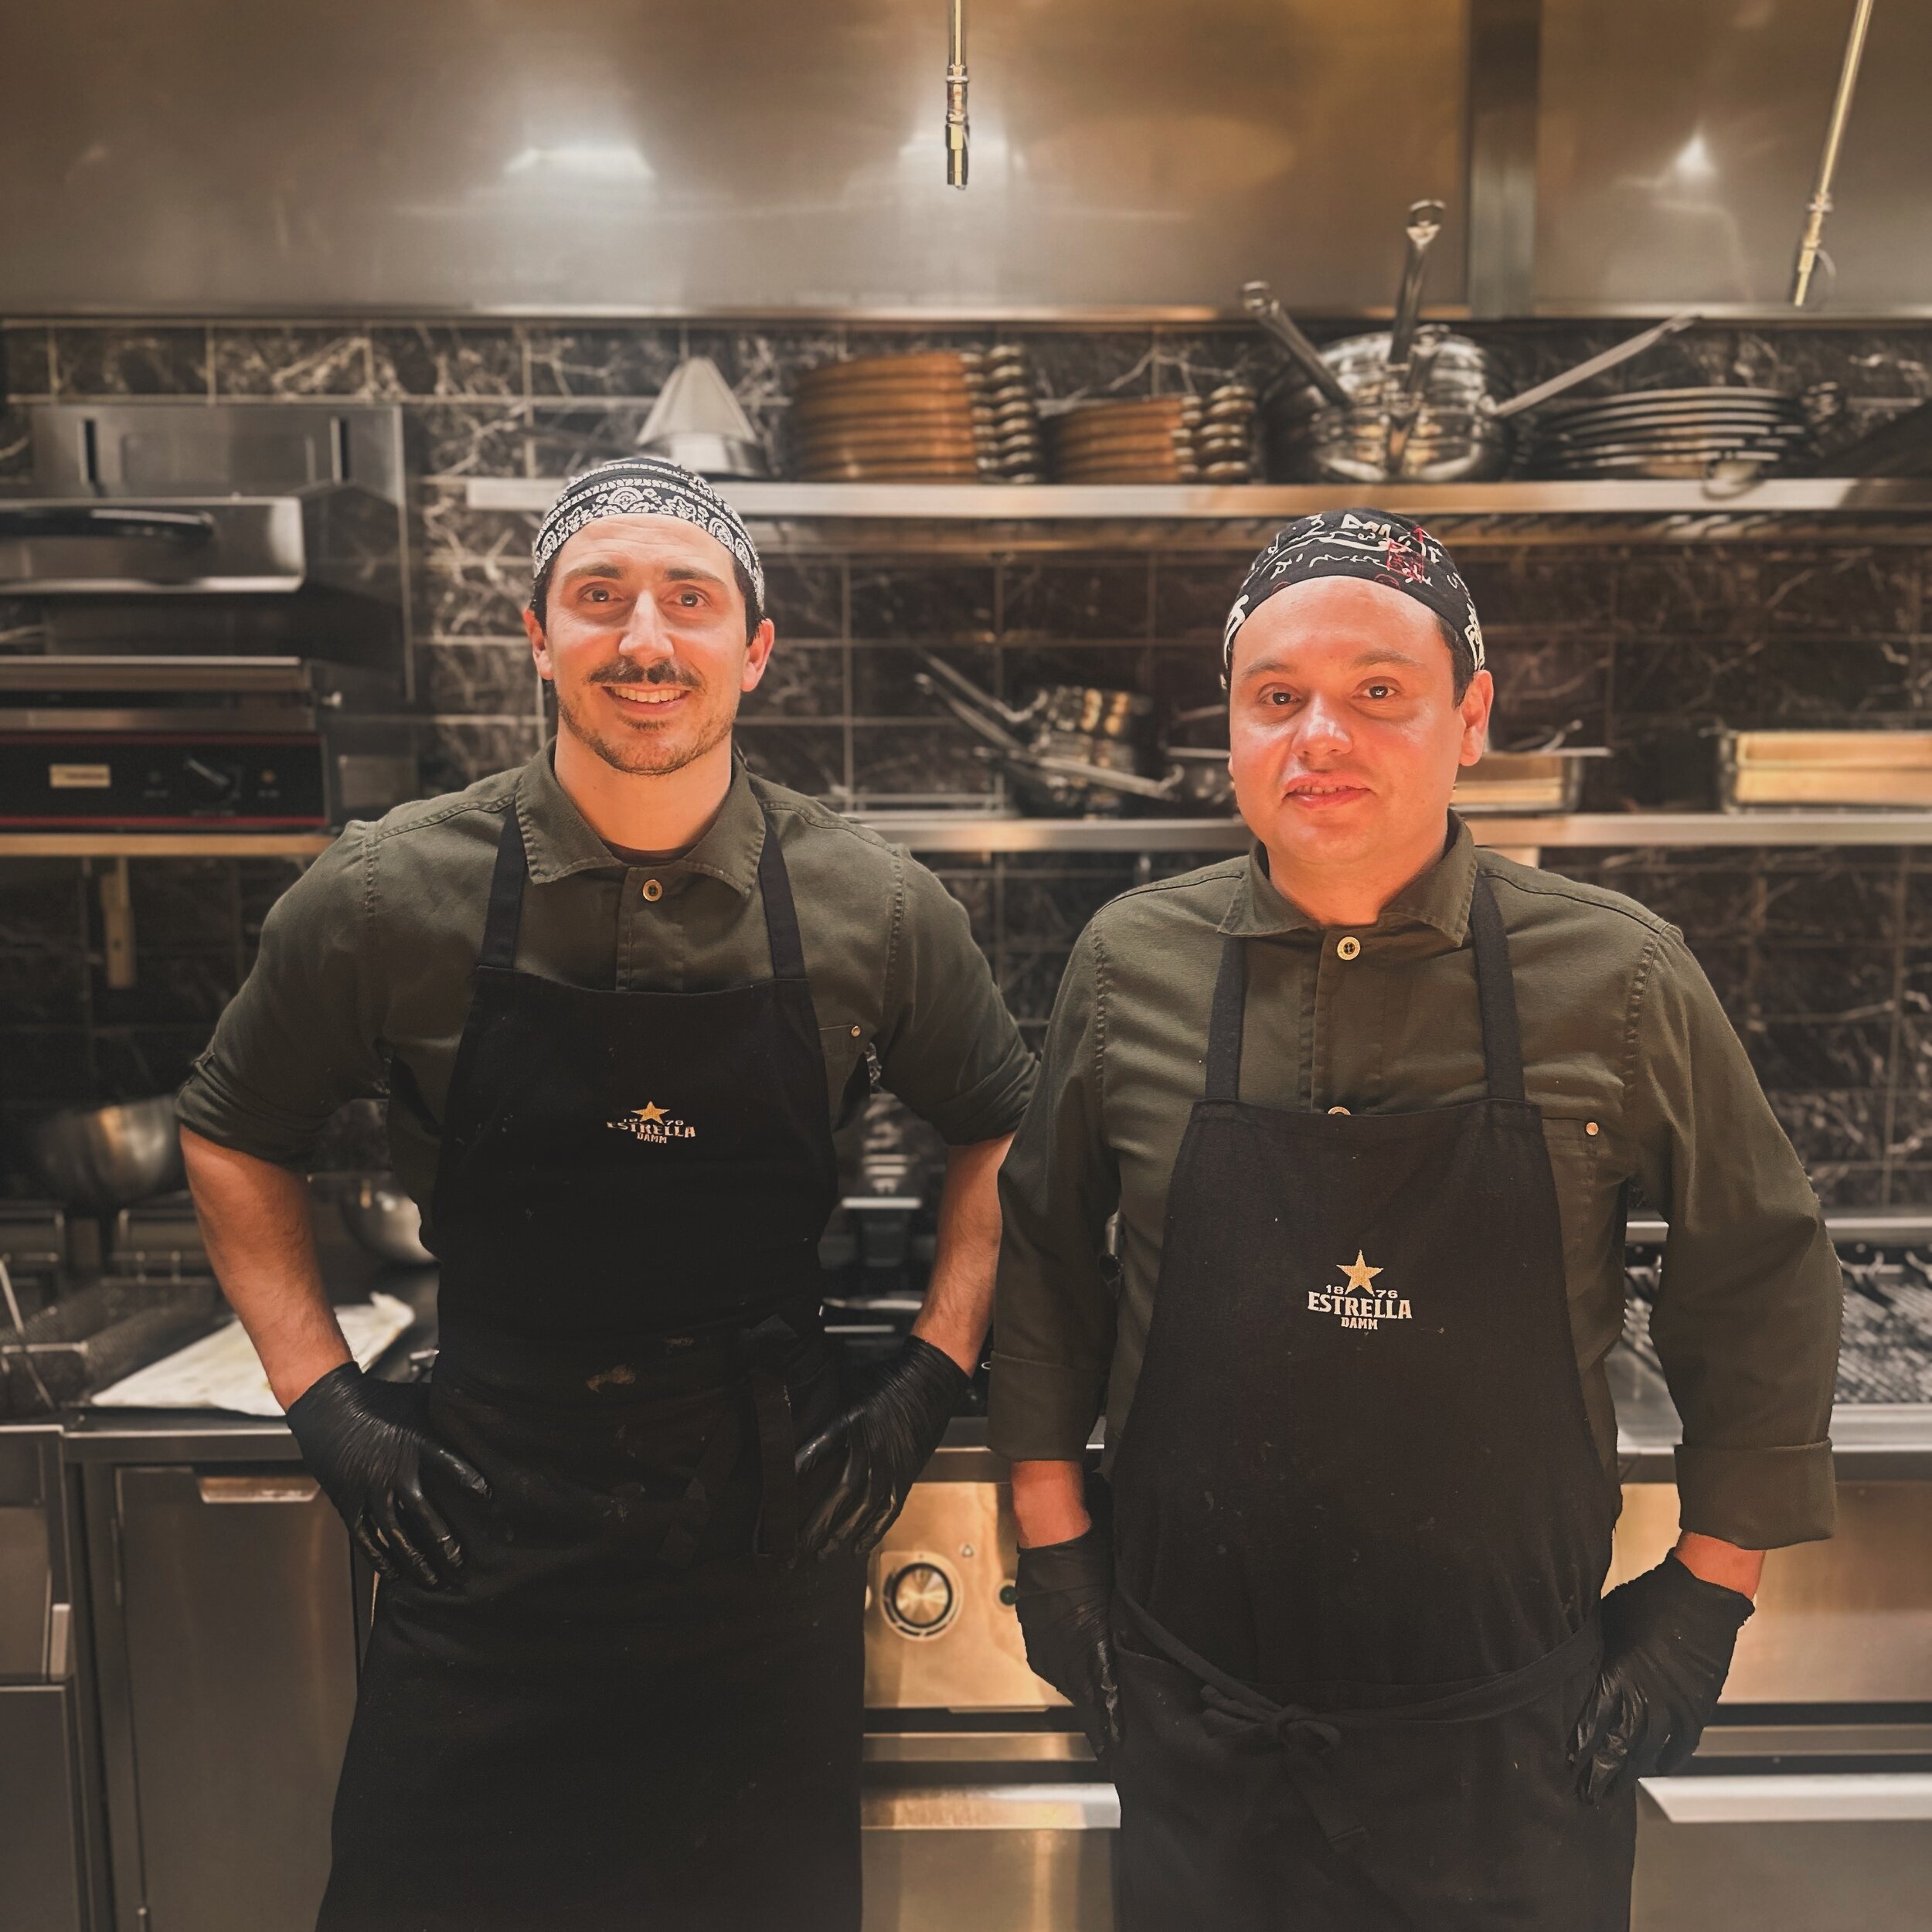 Andres Rodriguez Galvez, Head chef (right) with Guillermo Eiraldi Toyos, sous chef (left) ⭐️⭐️⭐️🇪🇸🇪🇸🇪🇸